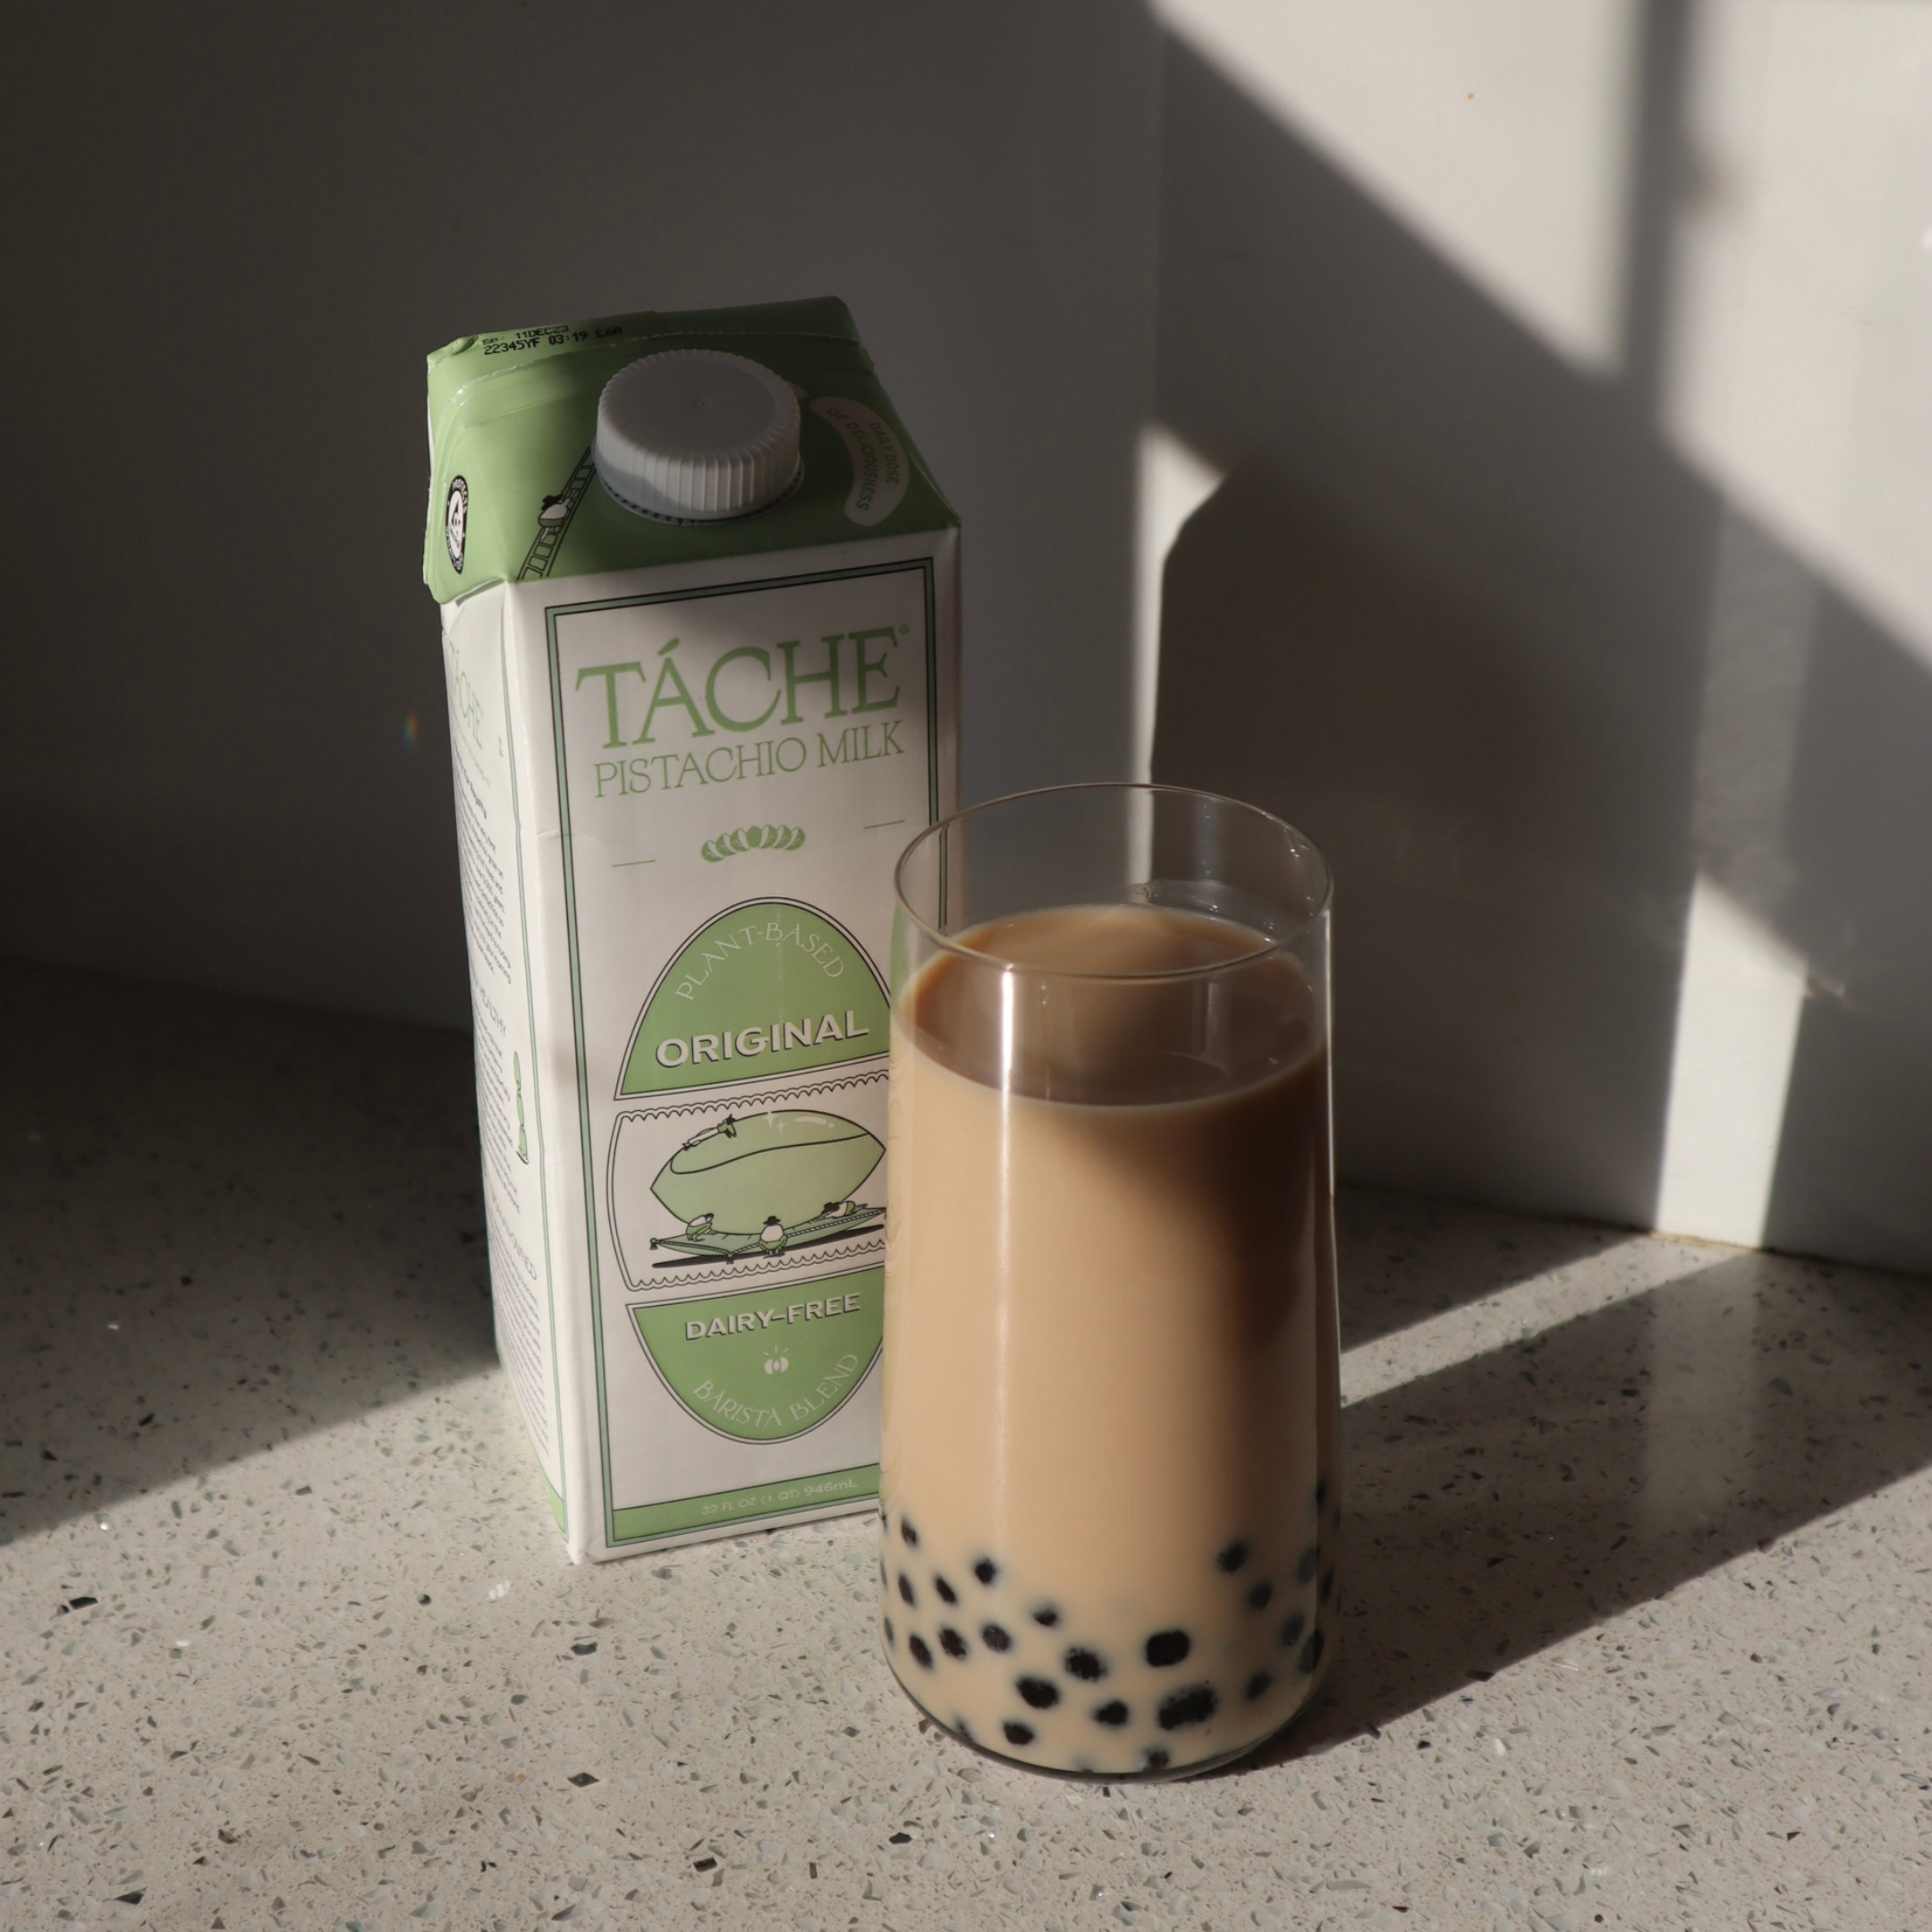 Your New Favorite Bubble Tea Recipe Is Made with Pistachio Milk